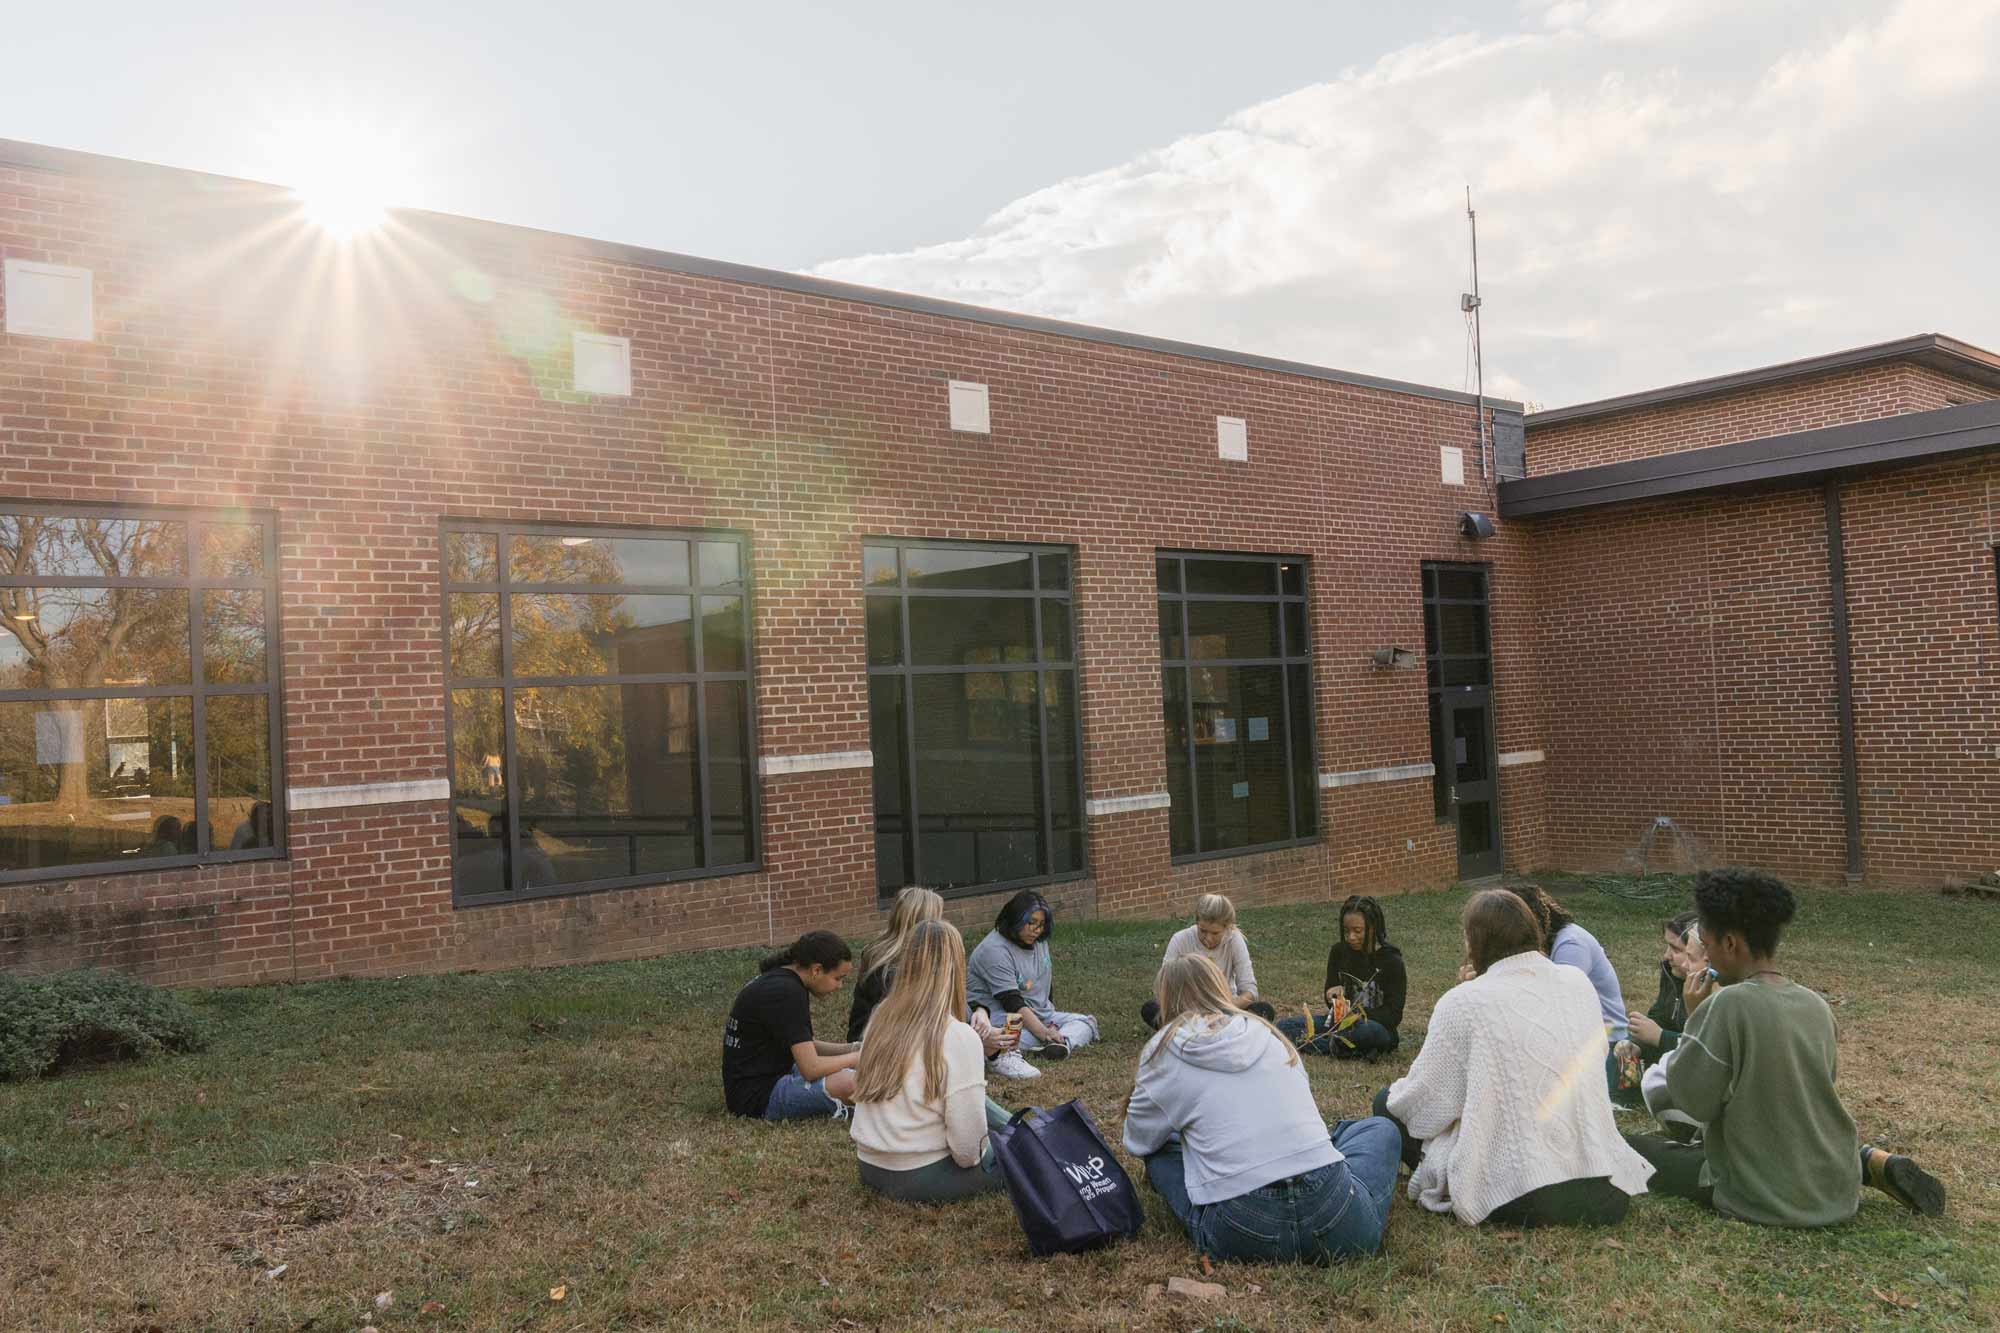 Group of students sitting on the ground in a circle talking outside of a brick school building